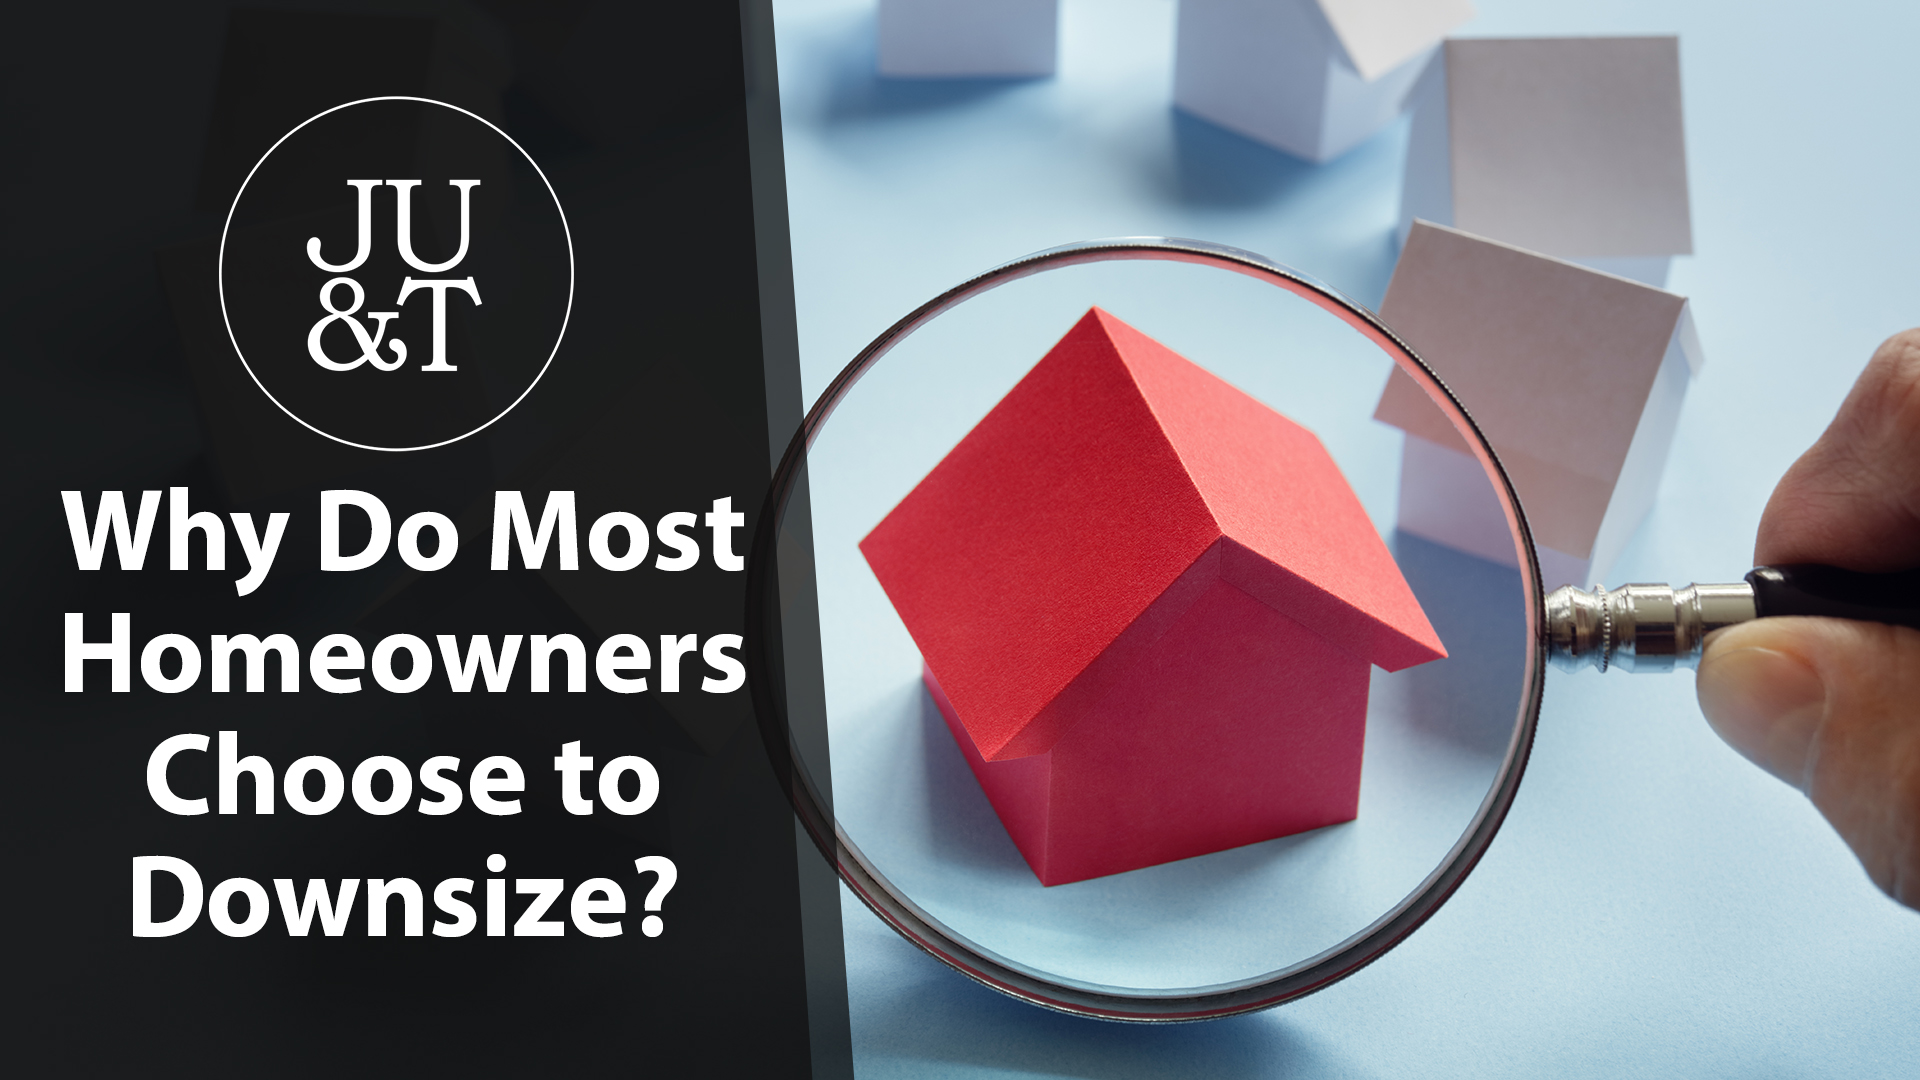 4 Reasons People Decide to Downsize